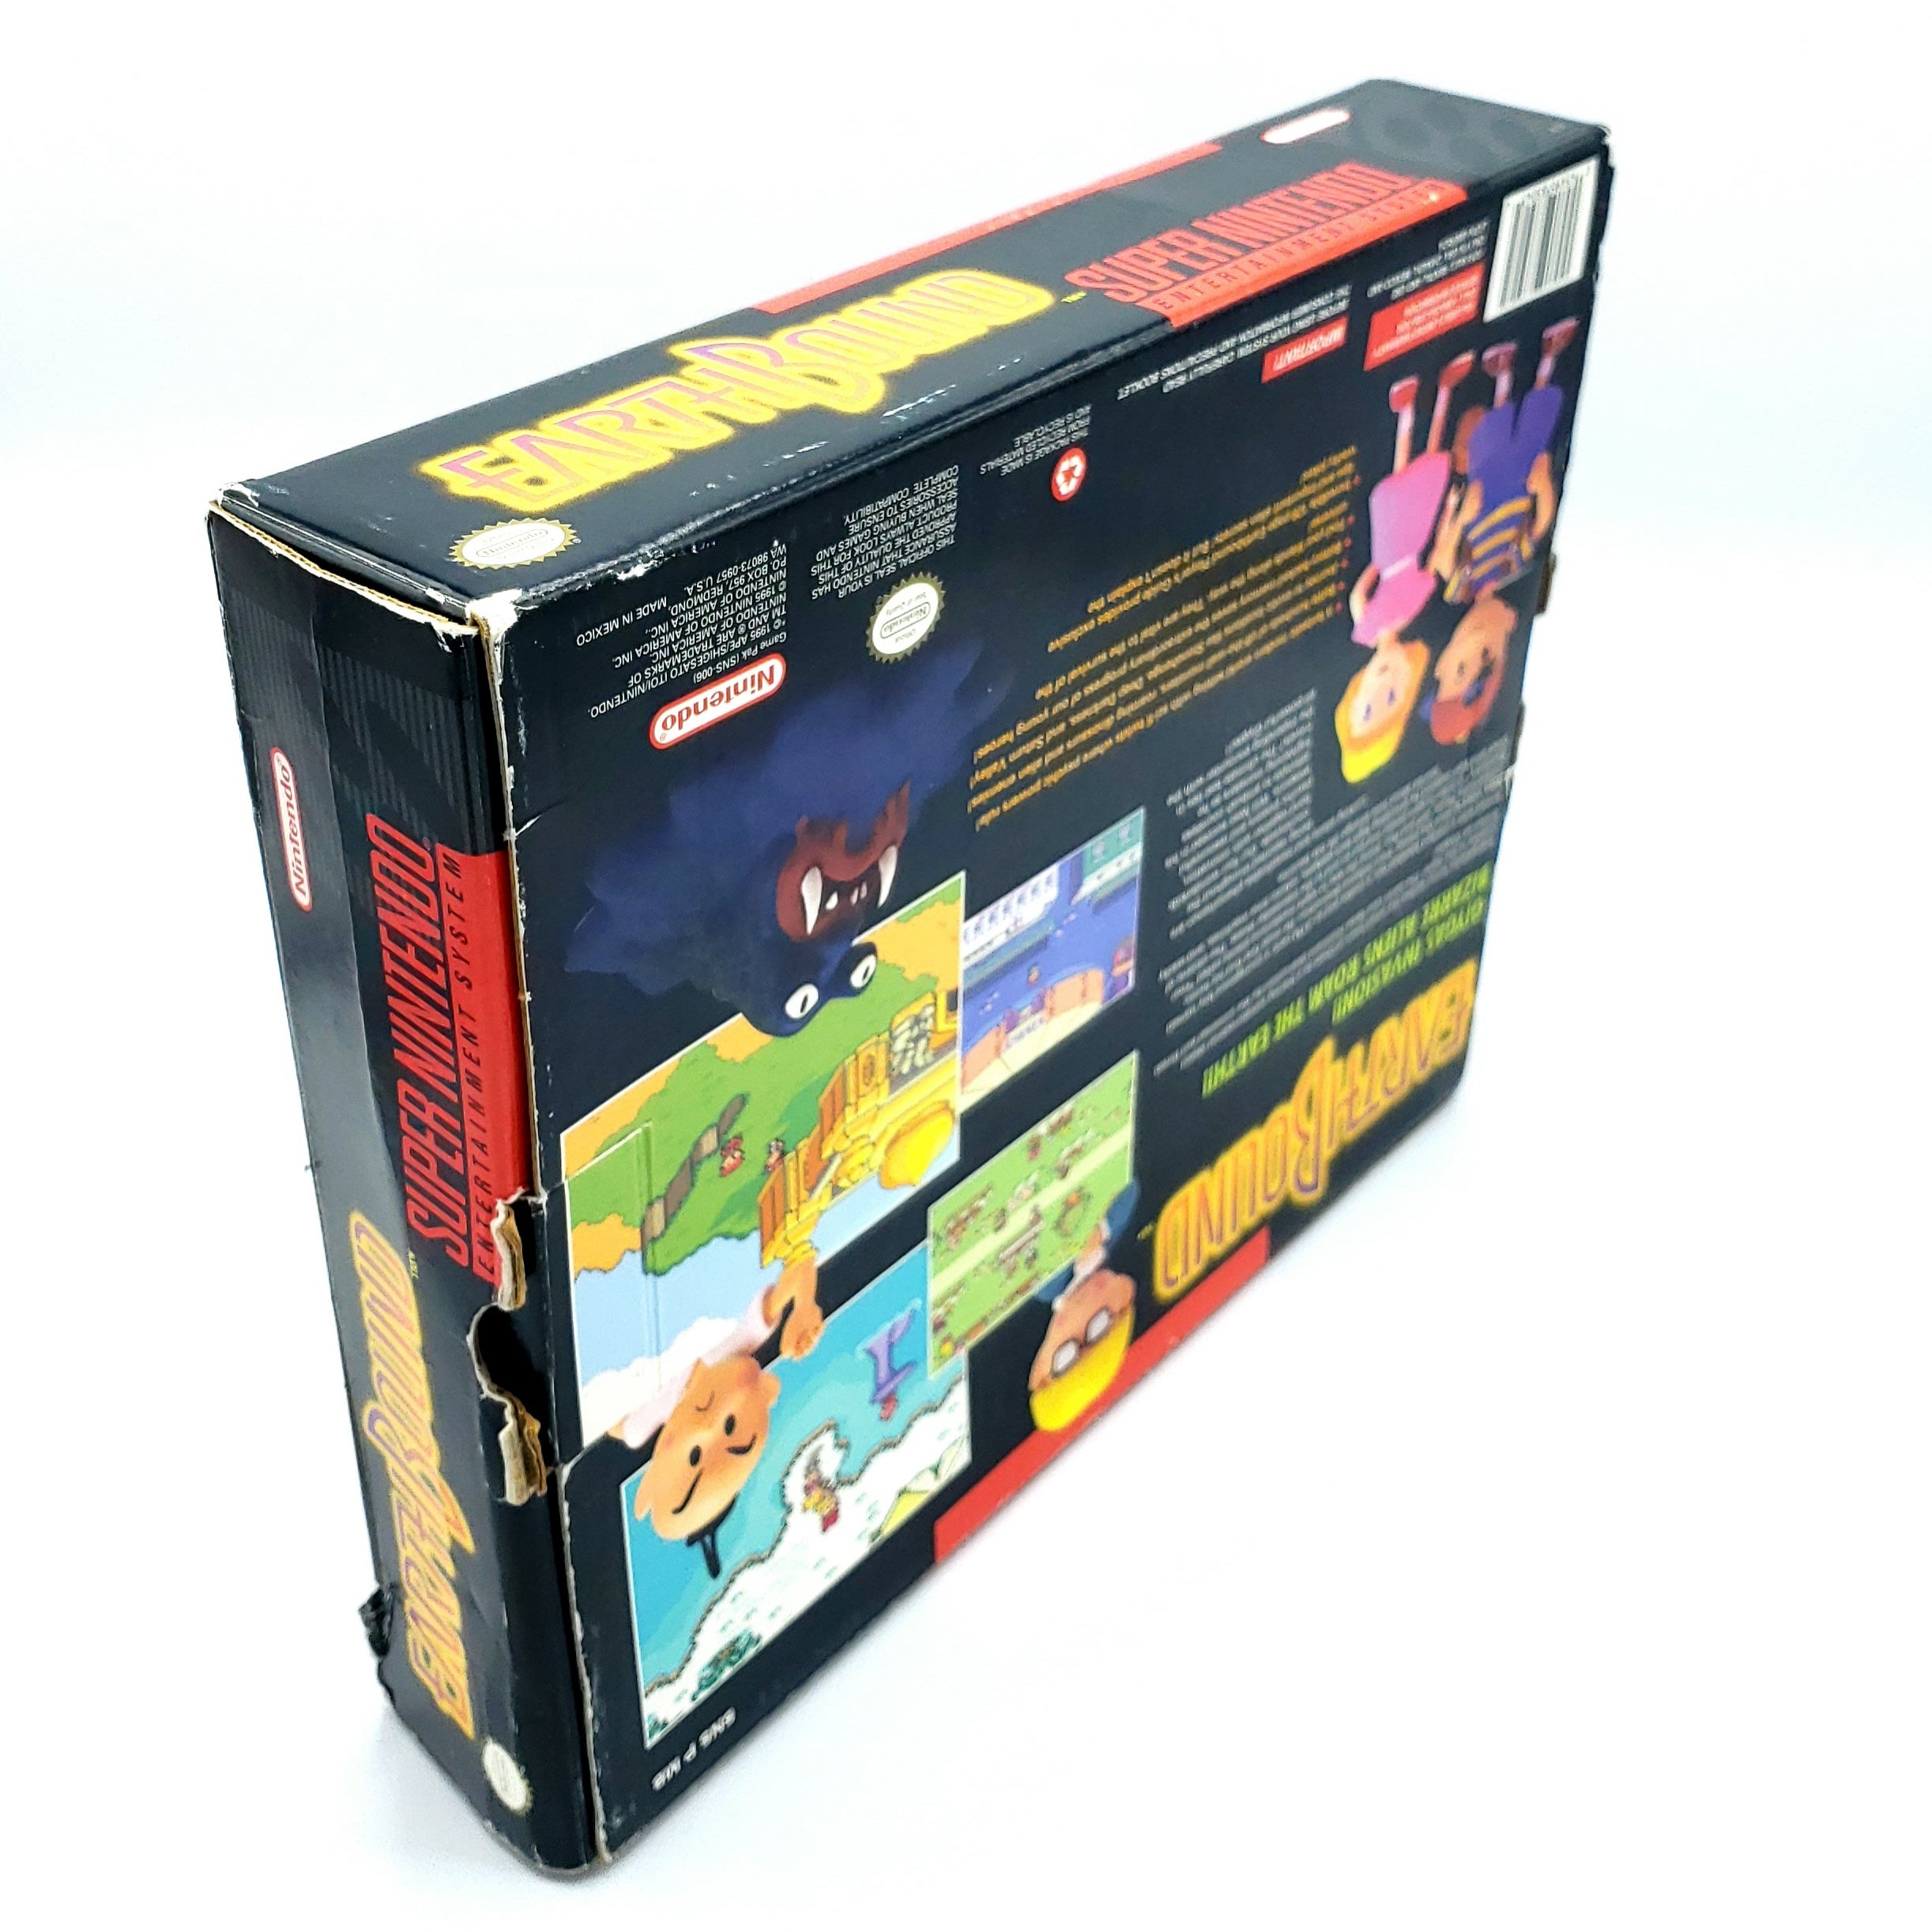 EarthBound - Super Nintendo (SNES) Game - YourGamingShop.com - Buy, Sell, Trade Video Games Online. 120 Day Warranty. Satisfaction Guaranteed.